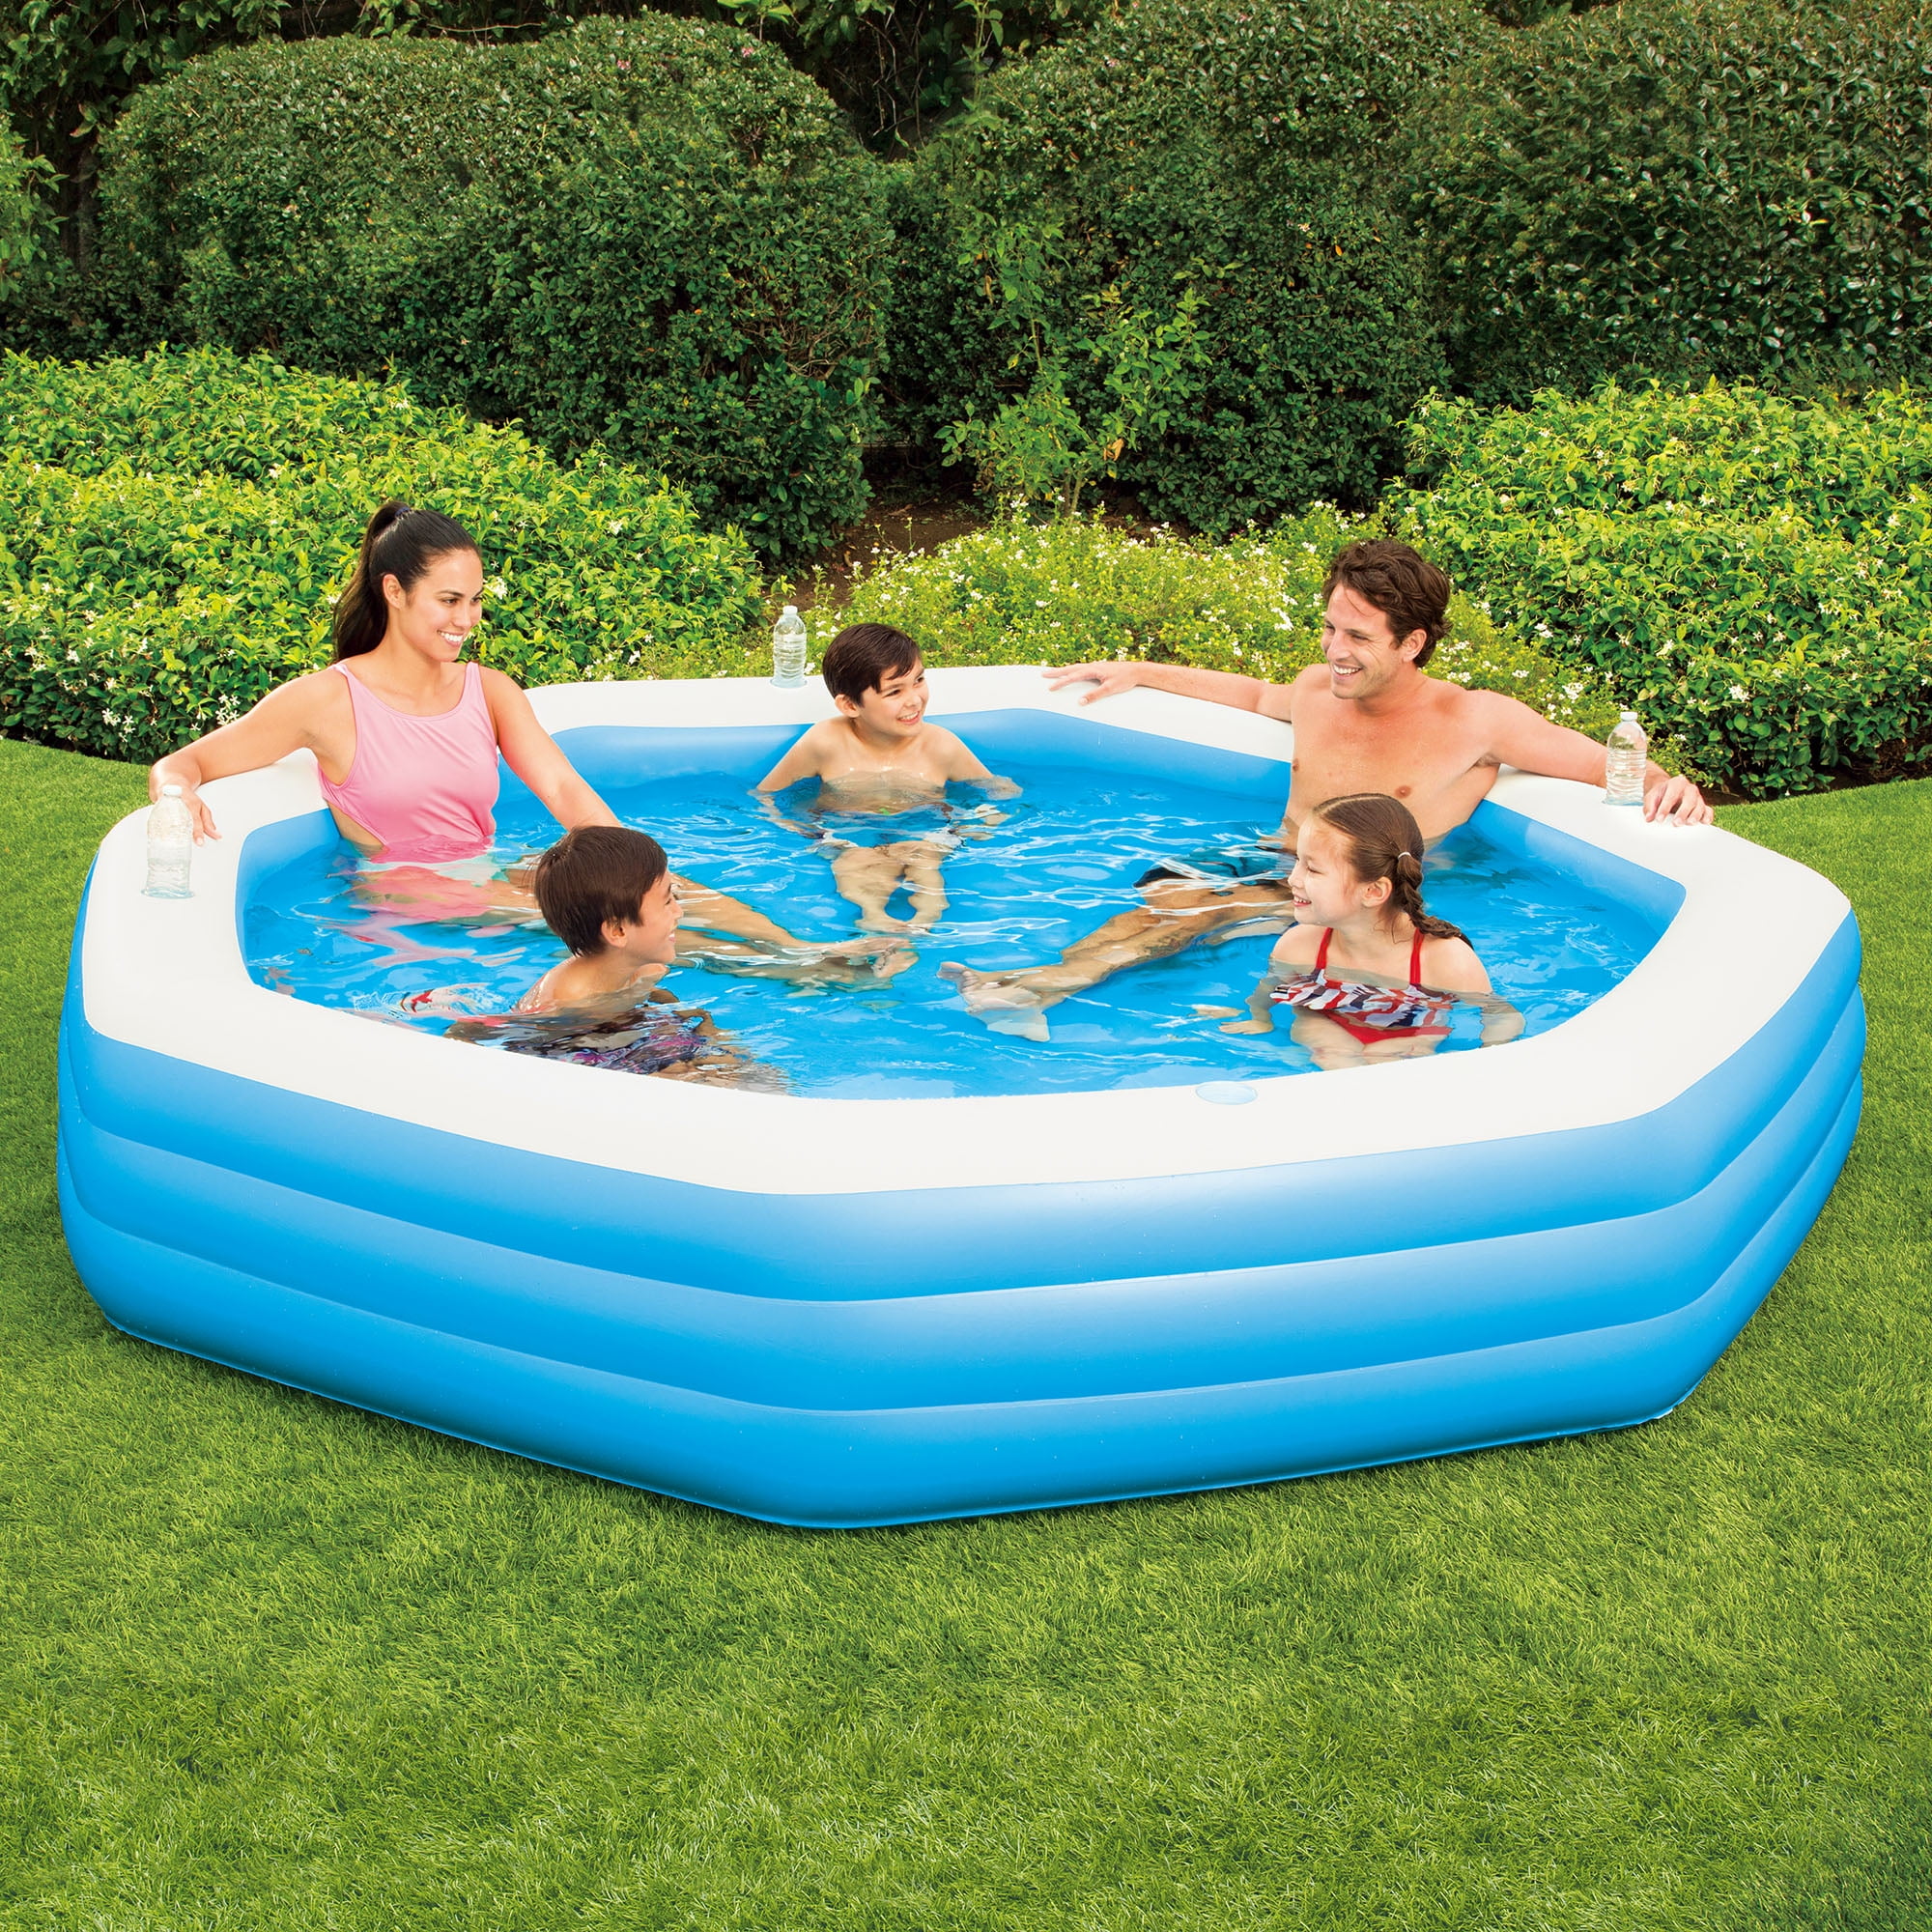 INFLATABLE 9FT OCTAGONAL FAMILY PADDLING POOL Enjoy your summer family 1806L 